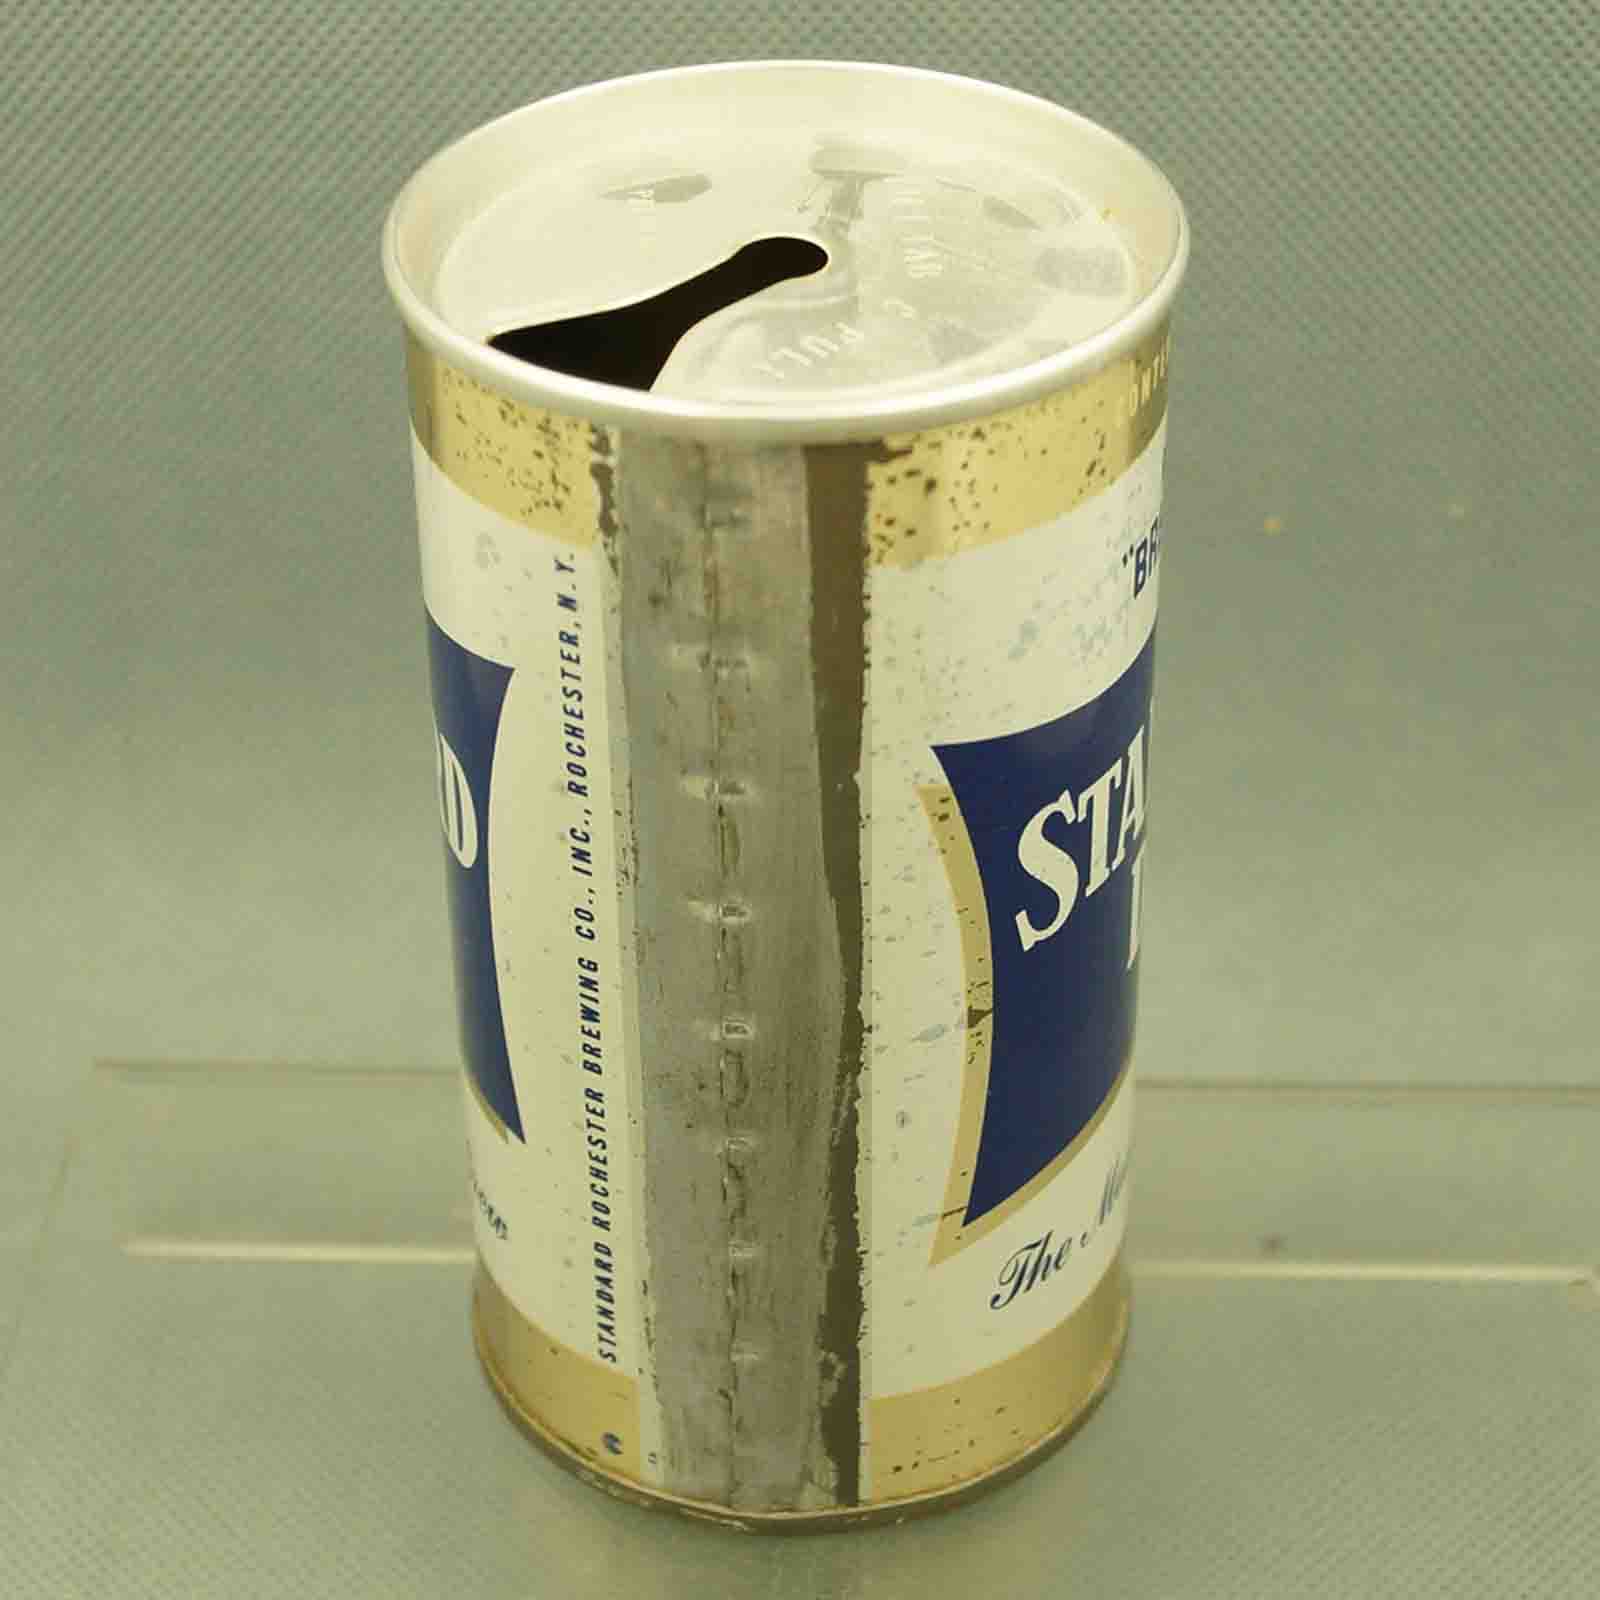 standard dry 126-9 pull tab beer can 4